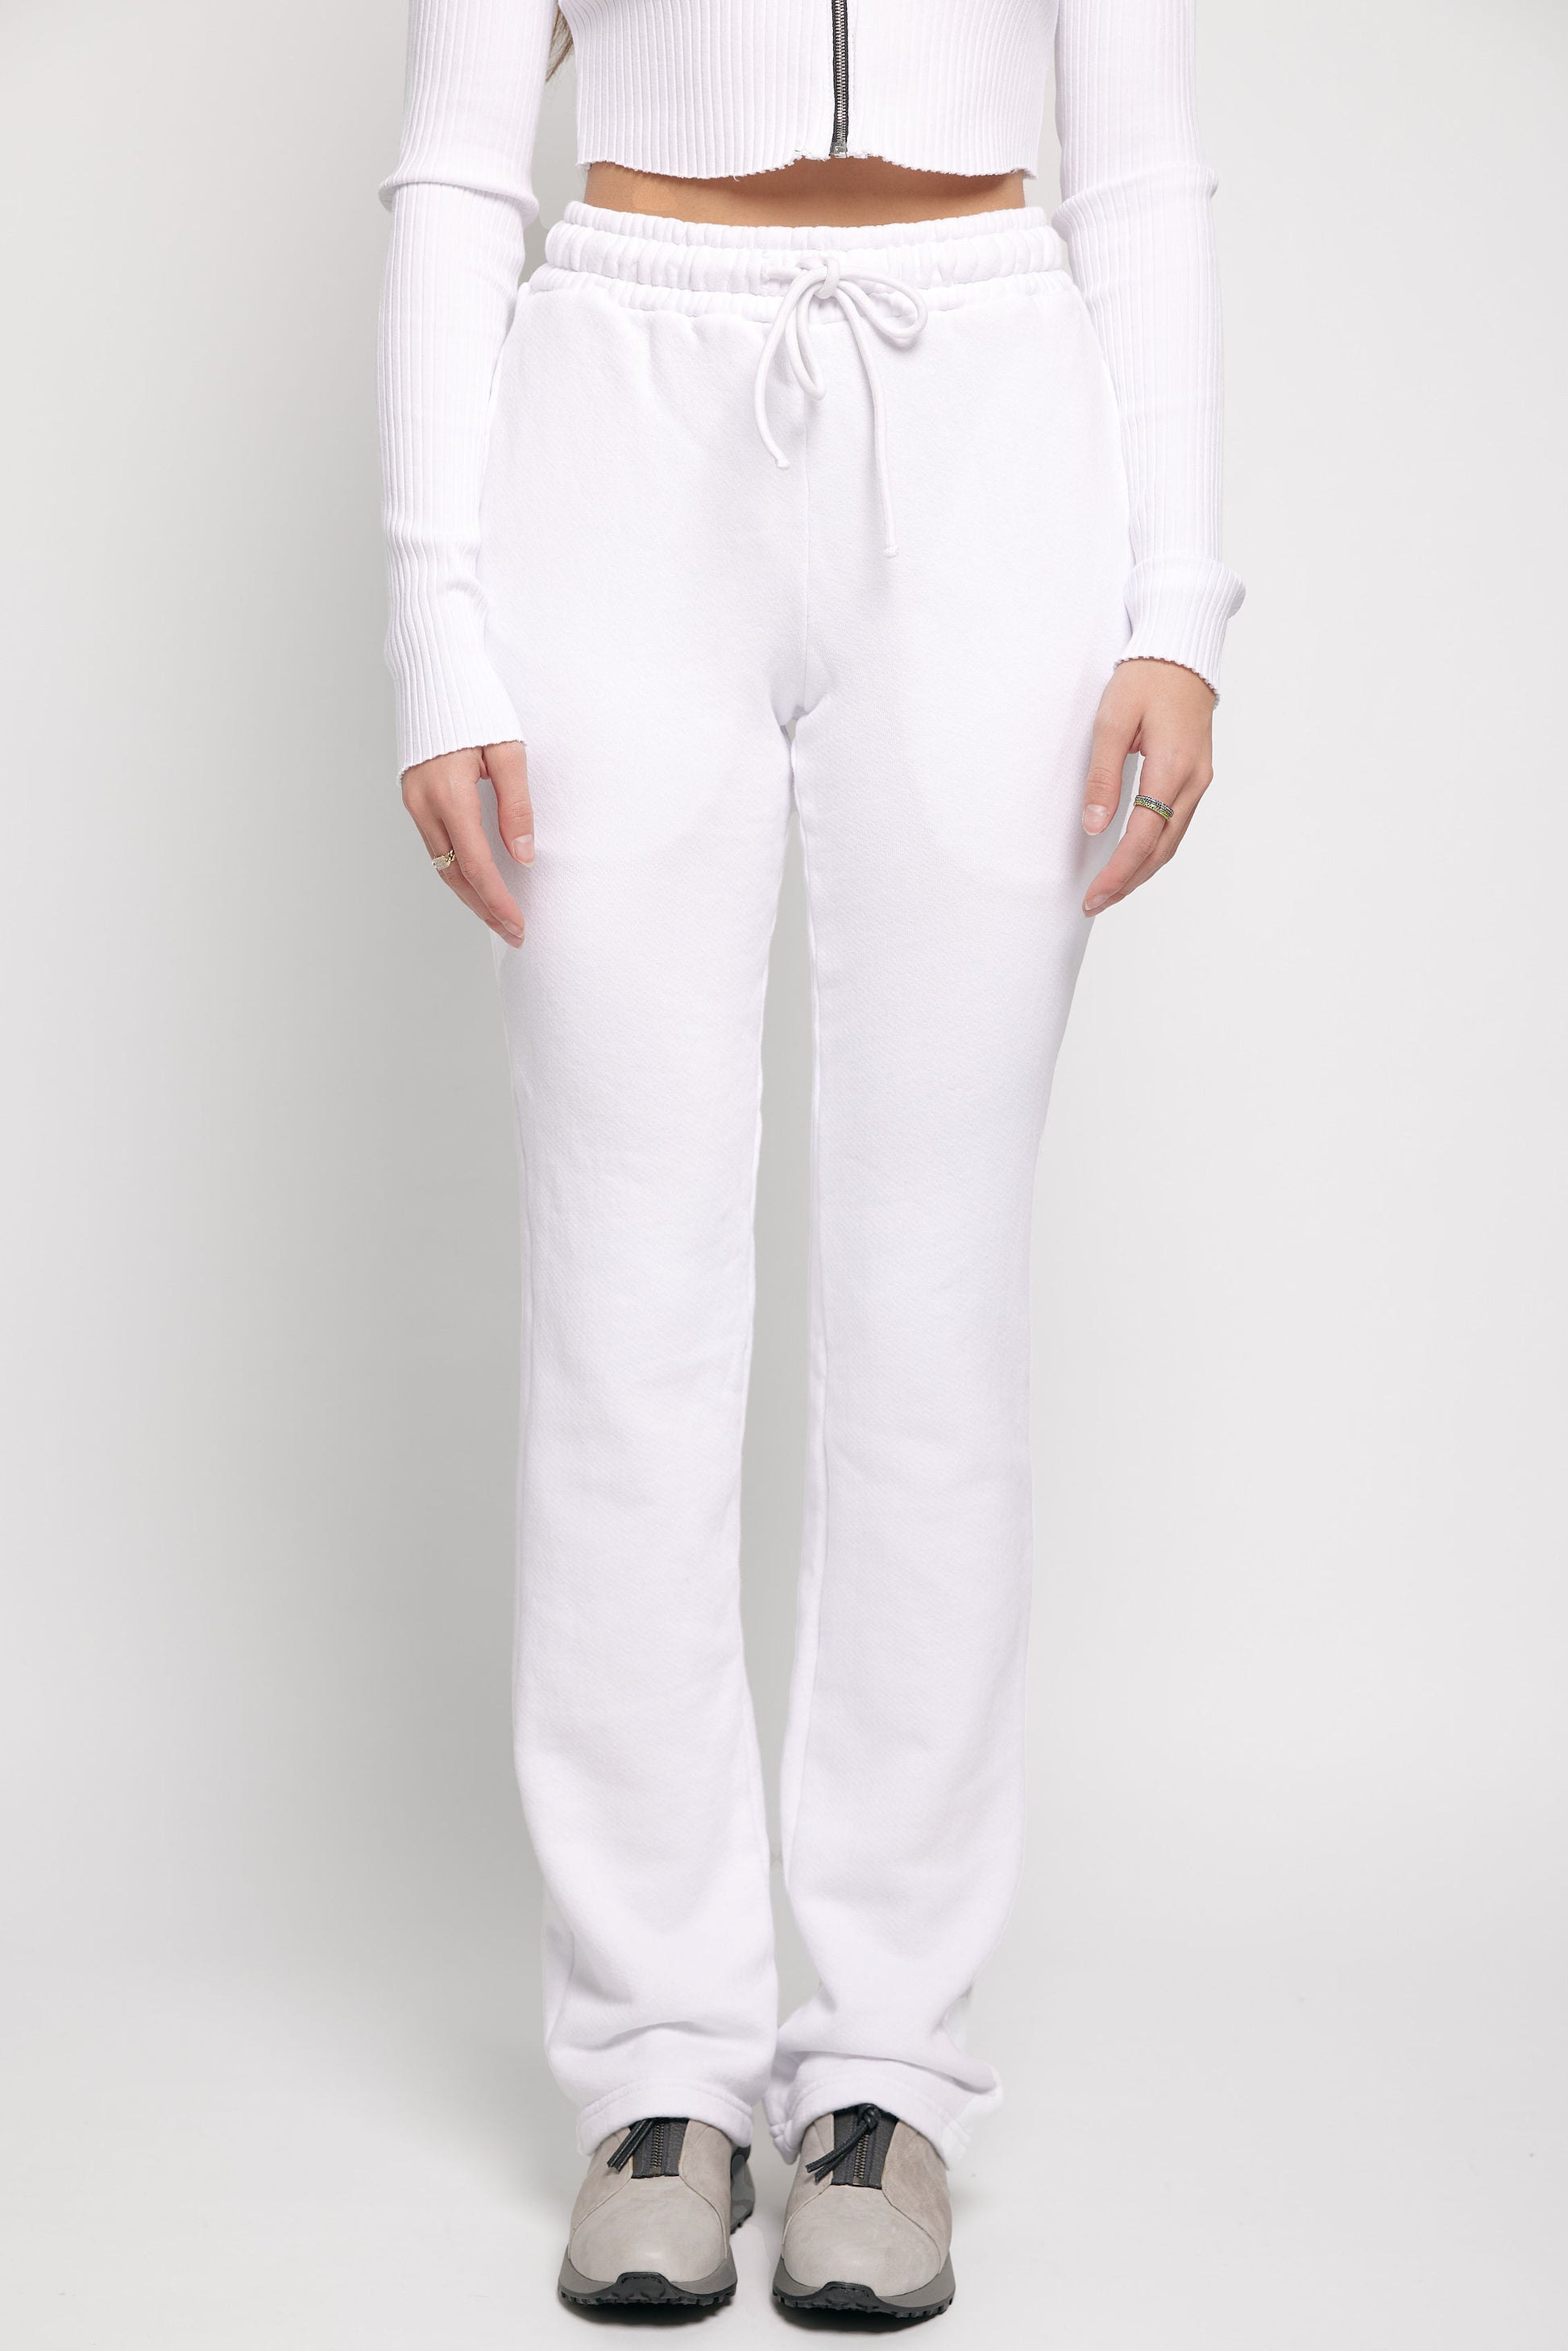 COTTON CITIZEN Brooklyn Trouser Pant in White